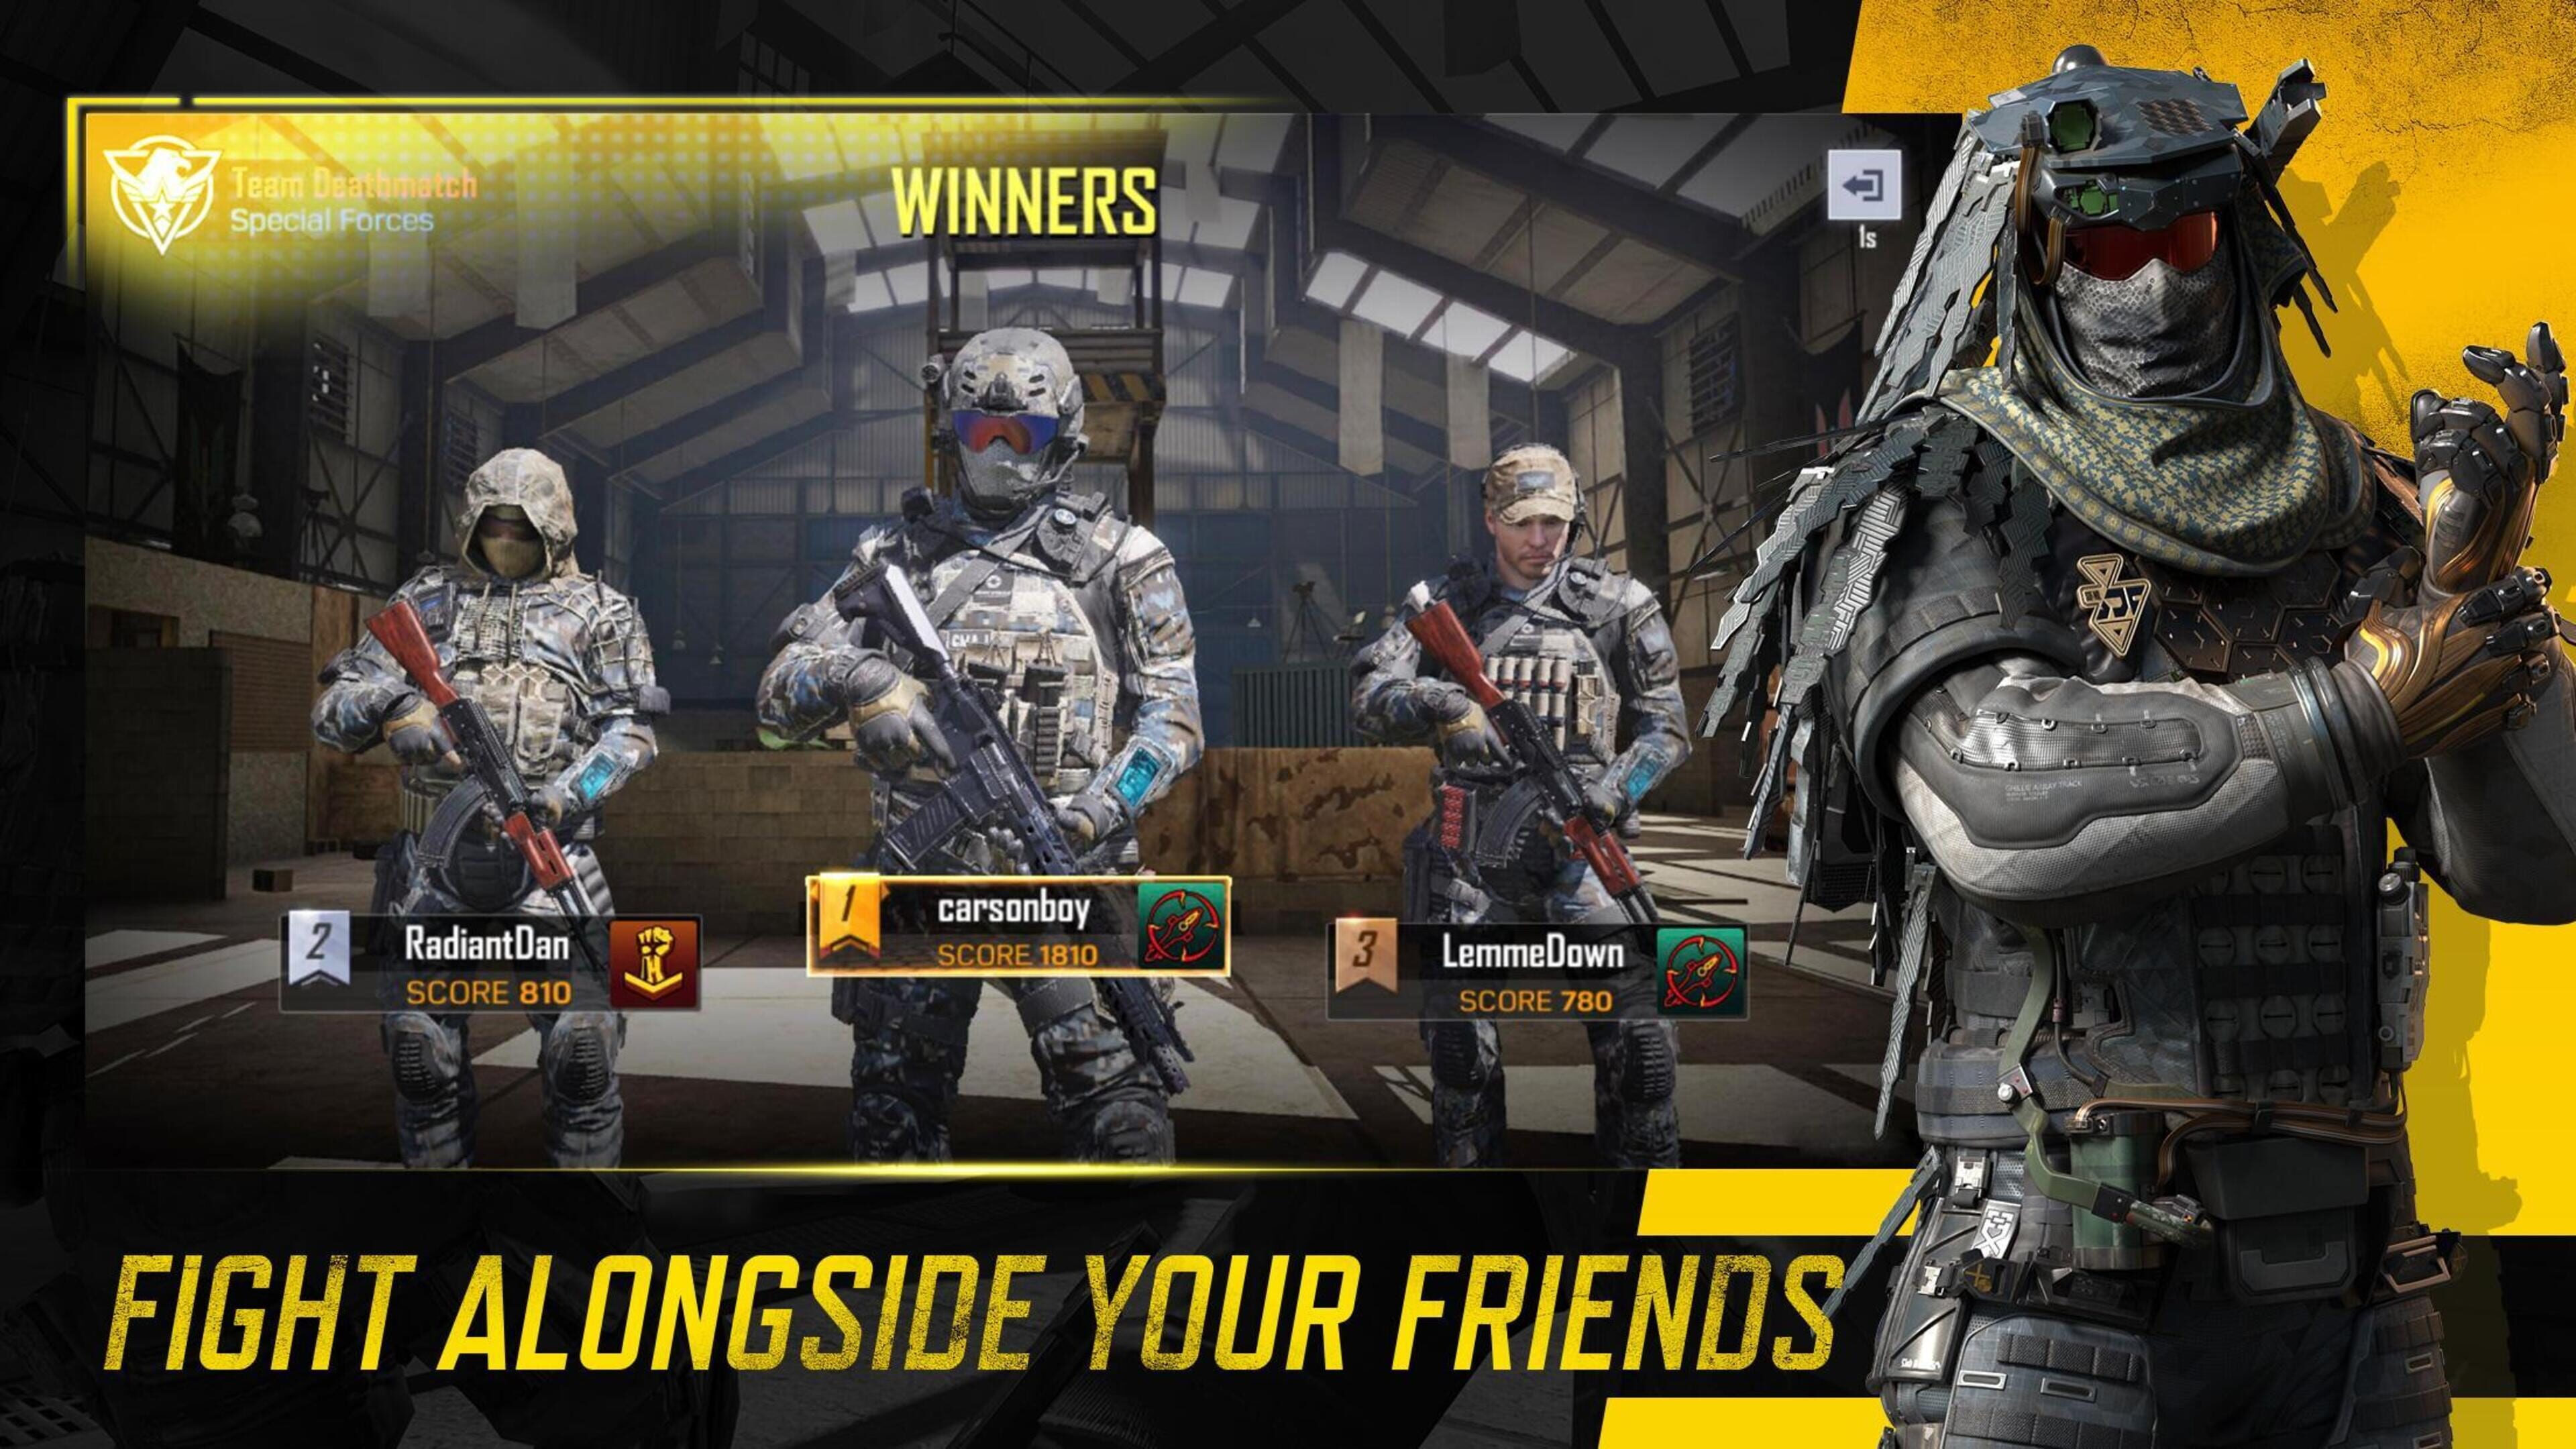 Is CoD: Mobile Shutting Down for Warzone Mobile? - GameRevolution